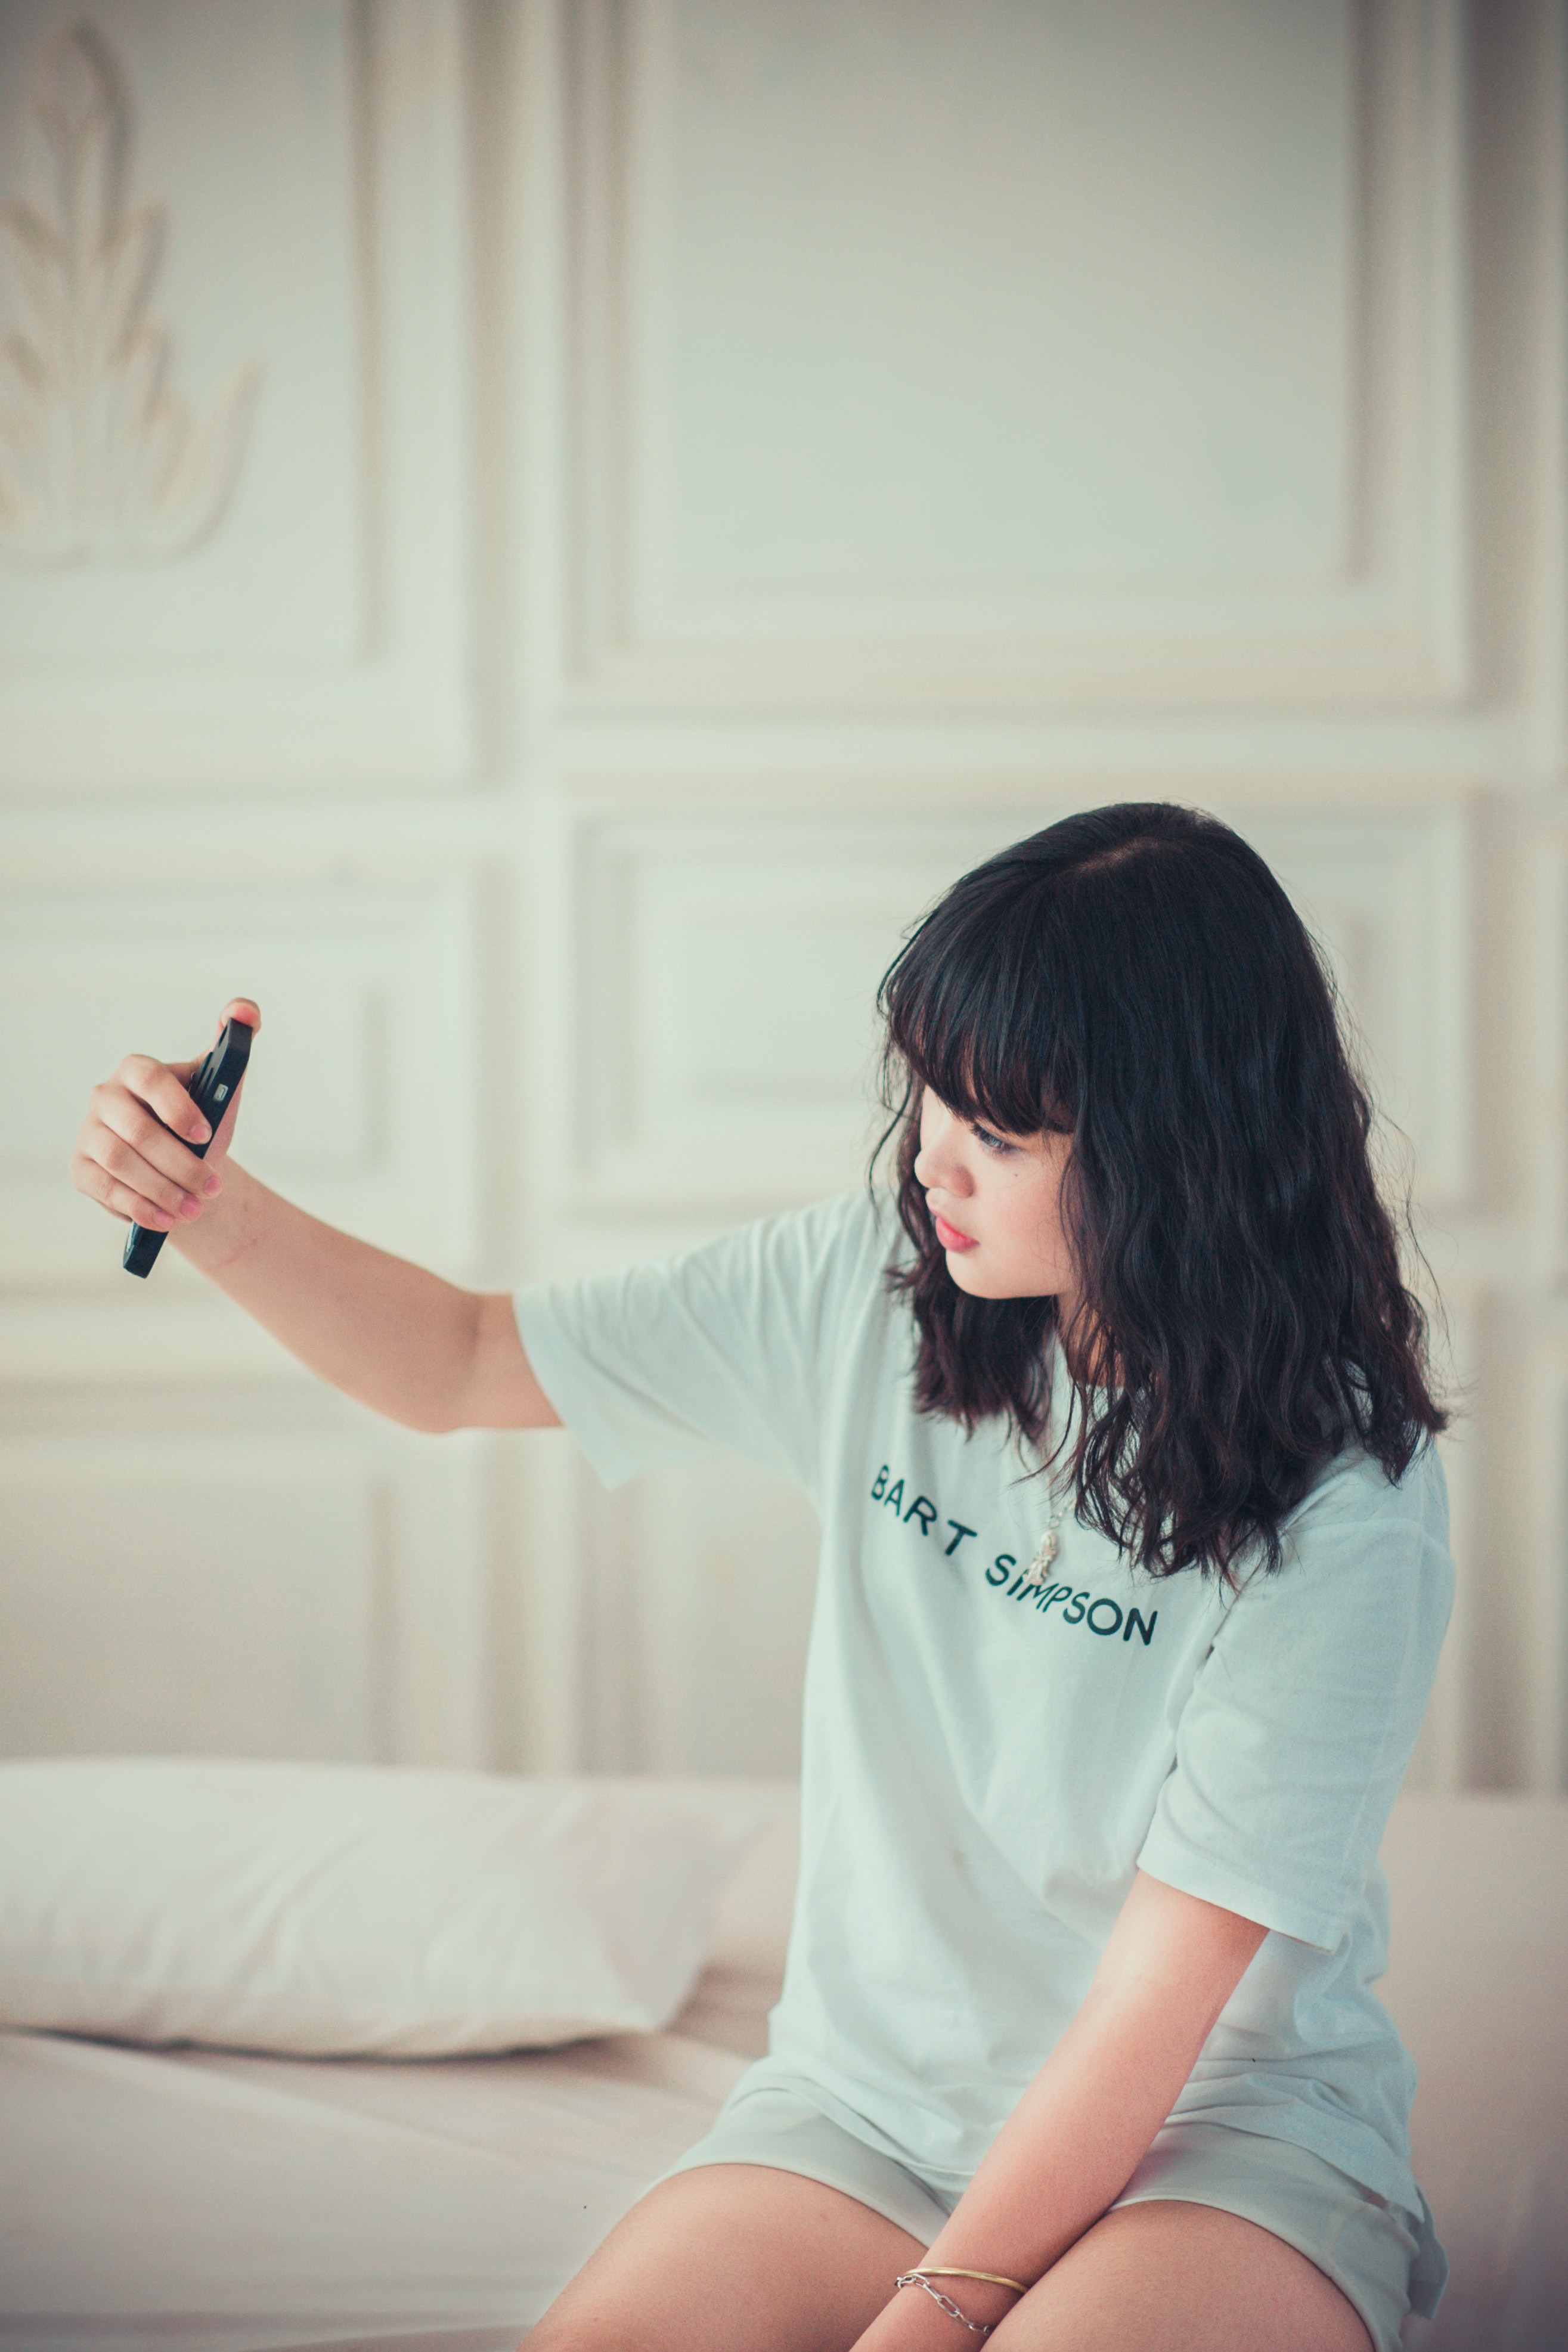 Girl in Blue Crew Neck Shirt Using Her Mobile Phone Indoors, Bed, Smile, Relax, Relaxation, HQ Photo